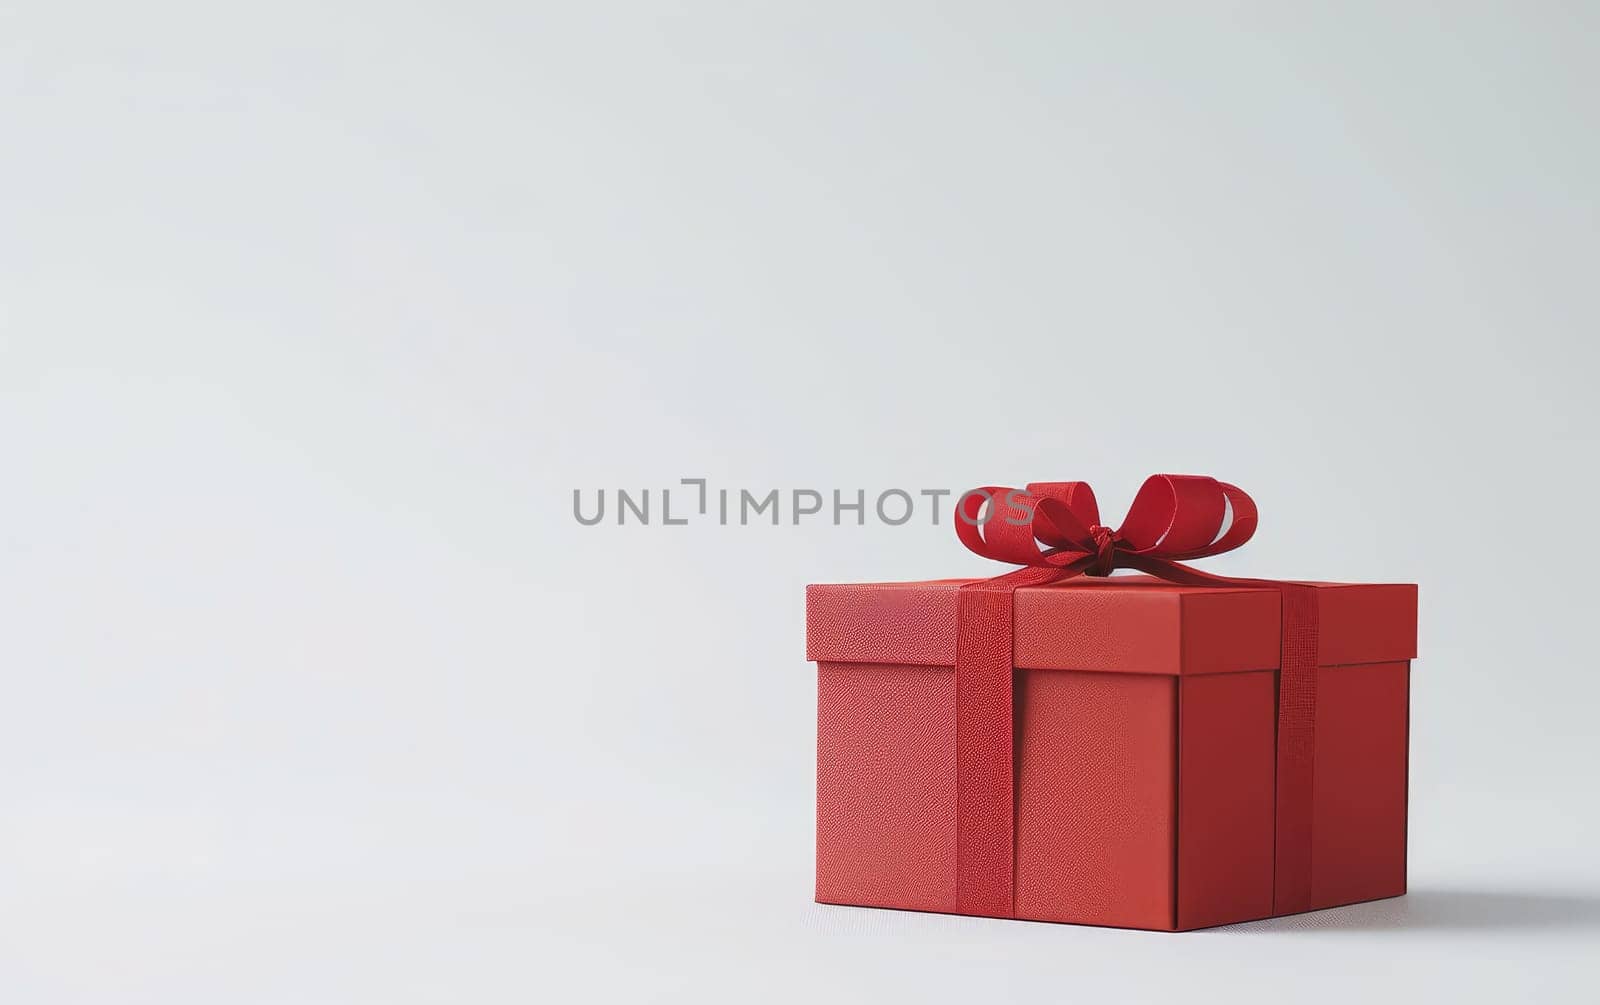 The classic combination of a red gift box with white ribbons offers a timeless appeal, suggesting a gift given with care and affection. by sfinks